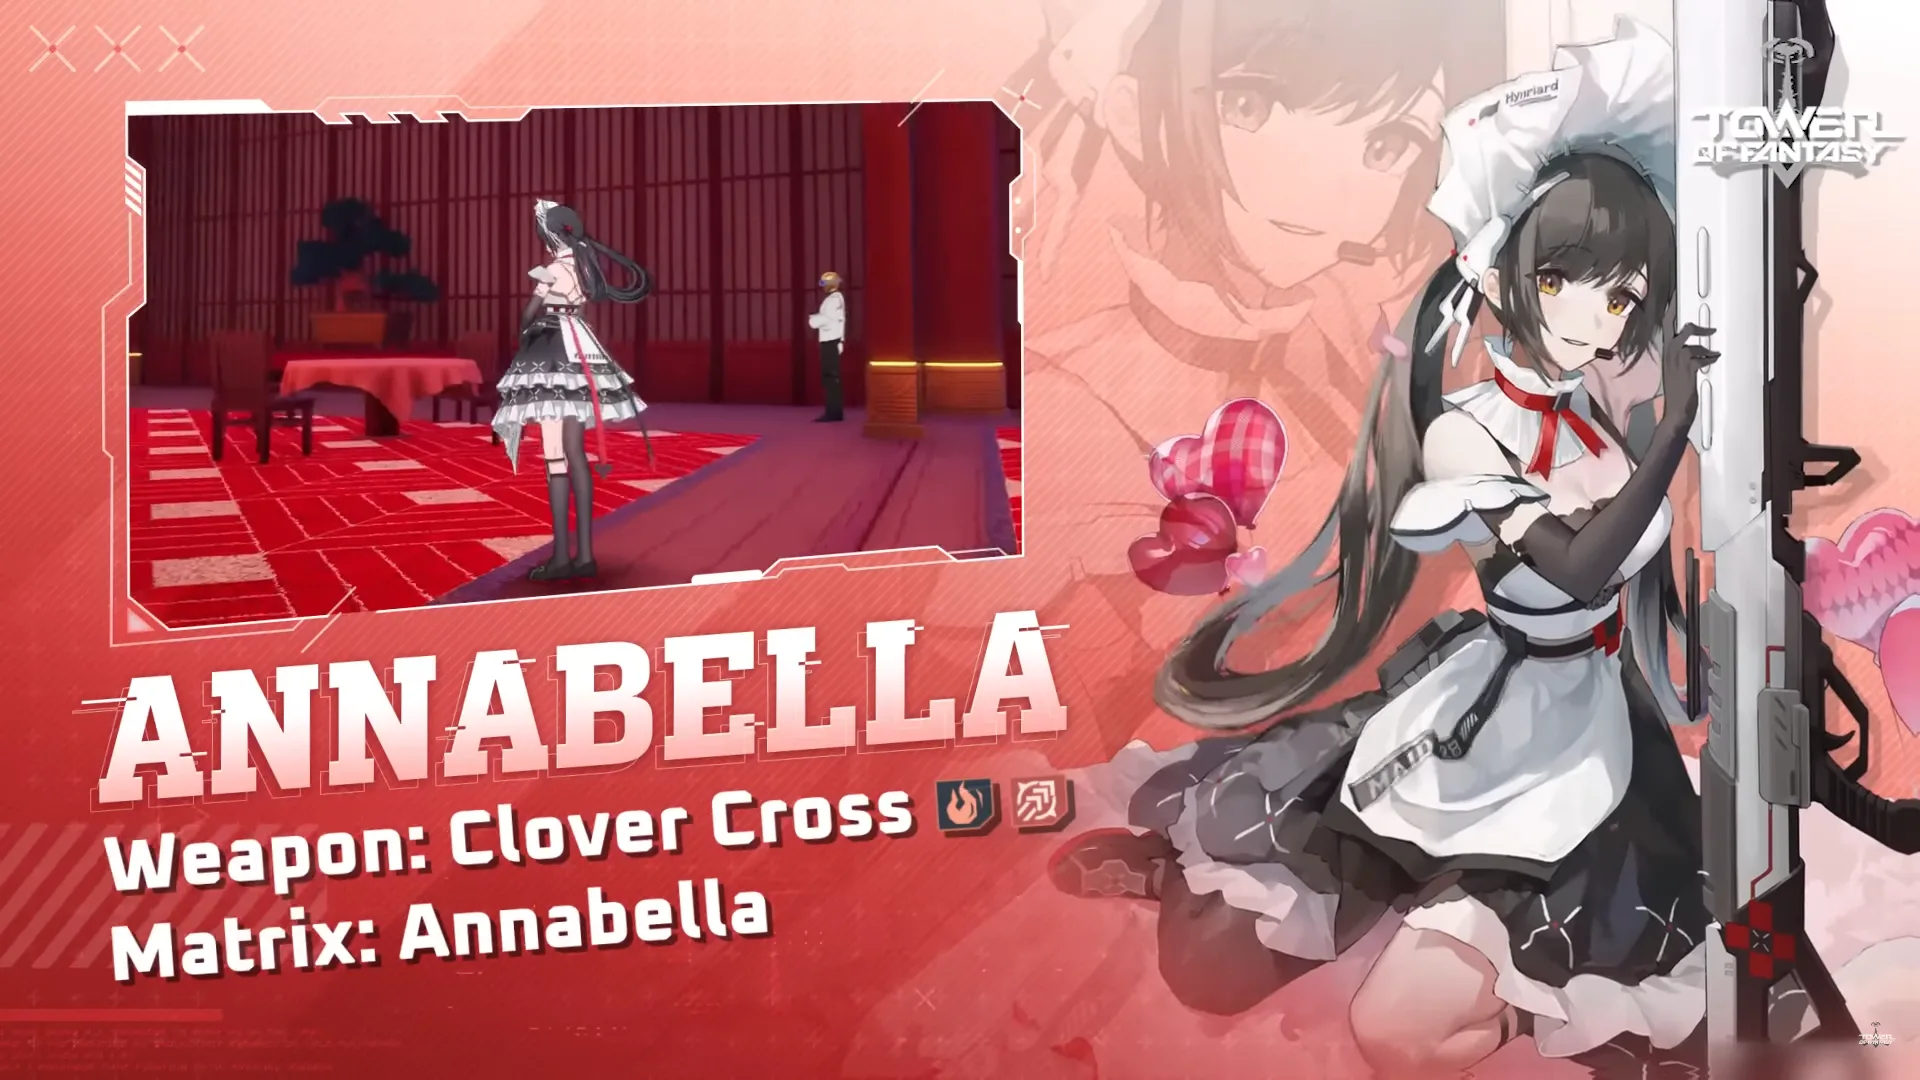 Anabella Clover Cross Tower of Fantasy – Battle Maid SSR Announcement